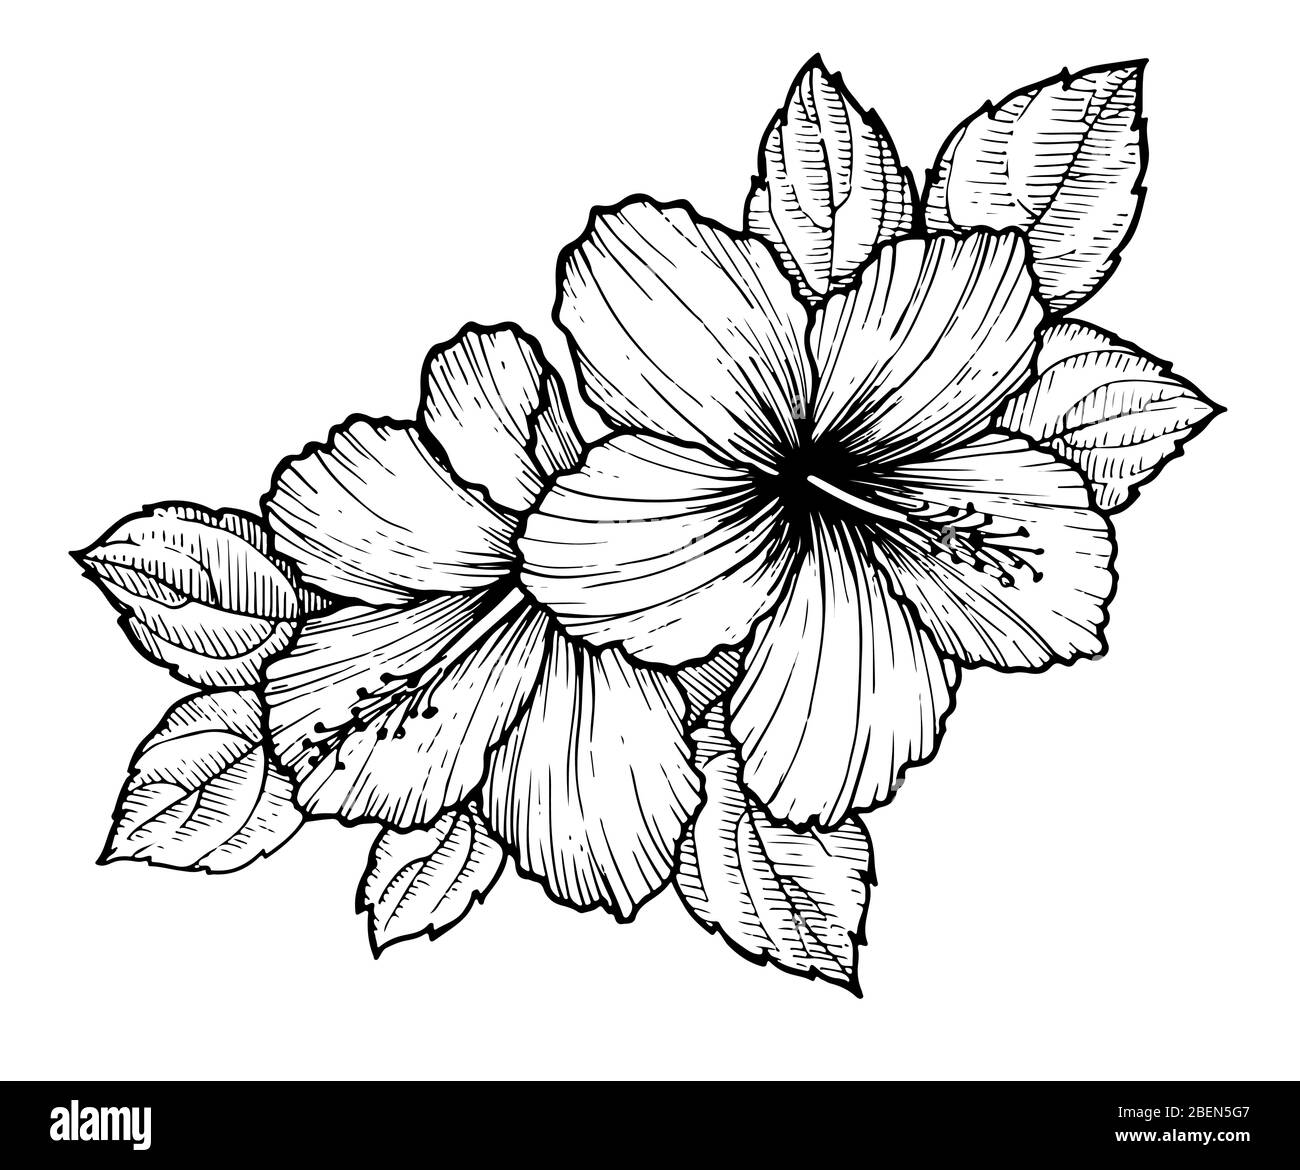 Hand drawn tropical hibiscus flower with leaves. Sketch florals on white background. Exotic blooms, engraving style for textile, surface design or ban Stock Vector